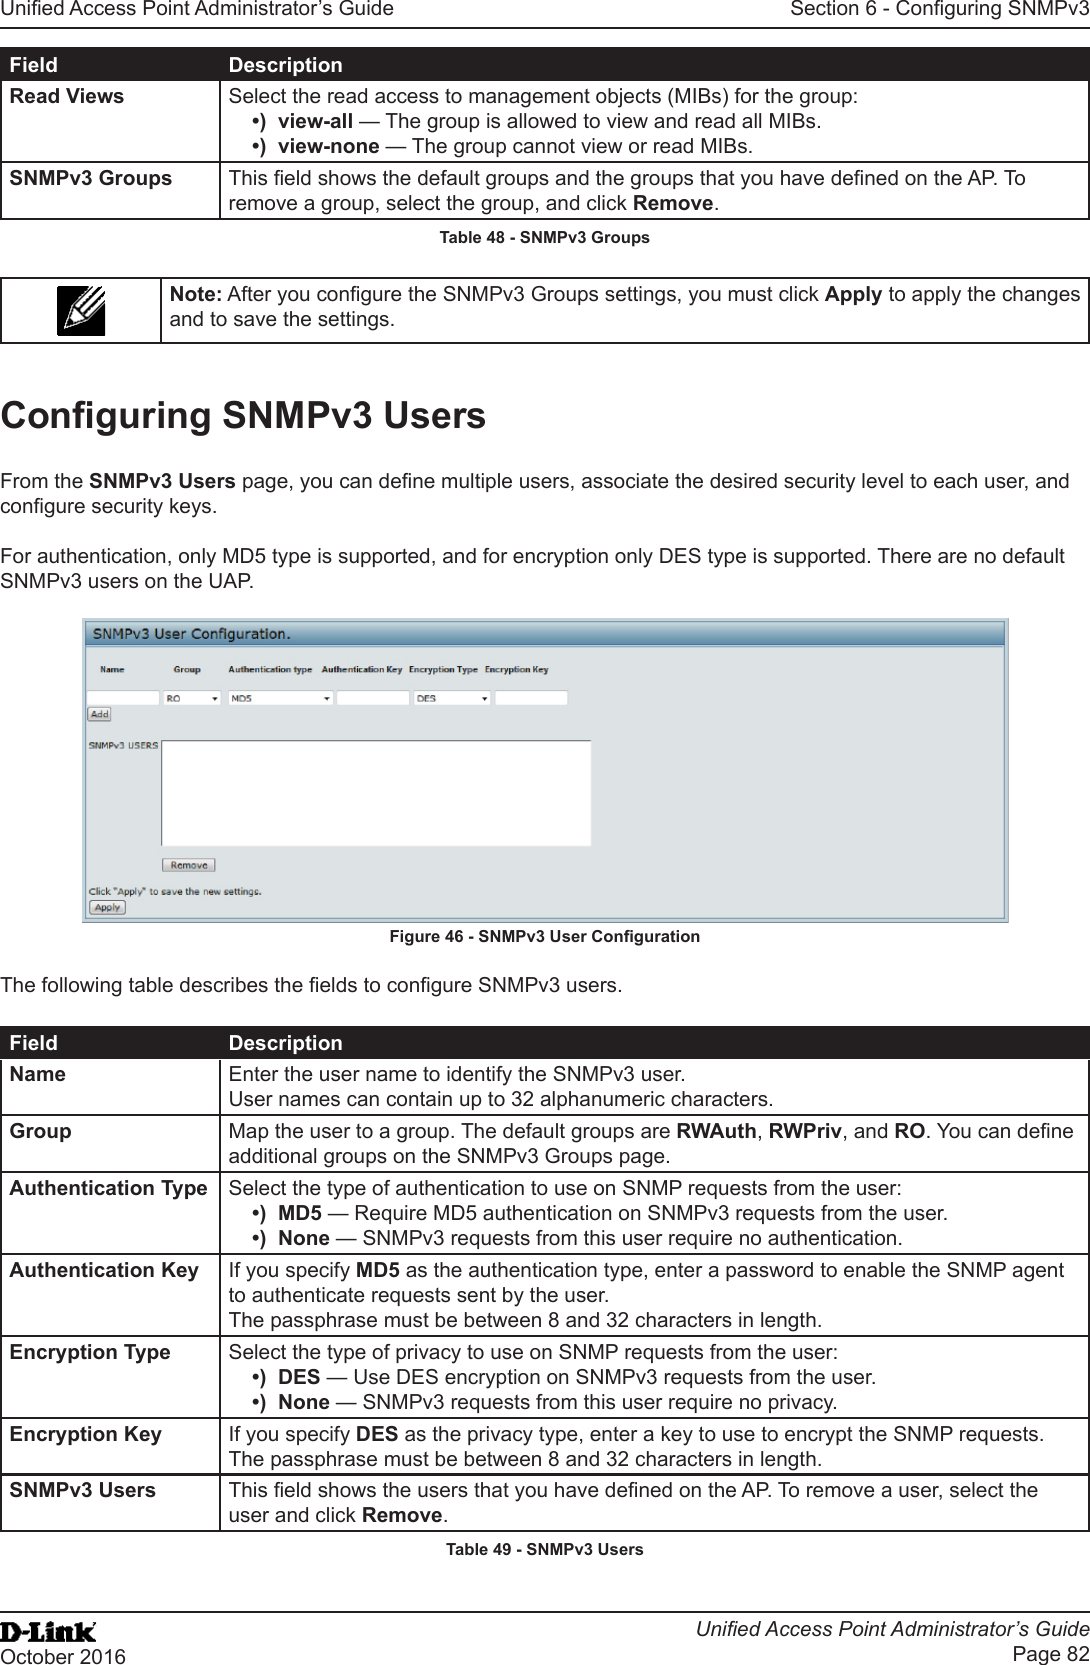 Unied Access Point Administrator’s GuideUnied Access Point Administrator’s GuidePage 82October 2016Section 6 - Conguring SNMPv3Field DescriptionRead Views Select the read access to management objects (MIBs) for the group:•)  view-all — The group is allowed to view and read all MIBs.•)  view-none — The group cannot view or read MIBs.SNMPv3 Groups This eld shows the default groups and the groups that you have dened on the AP. To remove a group, select the group, and click Remove.Table 48 - SNMPv3 GroupsNote: After you congure the SNMPv3 Groups settings, you must click Apply to apply the changes and to save the settings.Conguring SNMPv3 UsersFrom the SNMPv3 Users page, you can dene multiple users, associate the desired security level to each user, and congure security keys.For authentication, only MD5 type is supported, and for encryption only DES type is supported. There are no default SNMPv3 users on the UAP.Figure 46 - SNMPv3 User CongurationThe following table describes the elds to congure SNMPv3 users.Field DescriptionName Enter the user name to identify the SNMPv3 user. User names can contain up to 32 alphanumeric characters.Group Map the user to a group. The default groups are RWAuth, RWPriv, and RO. You can dene additional groups on the SNMPv3 Groups page.Authentication Type Select the type of authentication to use on SNMP requests from the user:•)  MD5 — Require MD5 authentication on SNMPv3 requests from the user.•)  None — SNMPv3 requests from this user require no authentication.Authentication Key If you specify MD5 as the authentication type, enter a password to enable the SNMP agent to authenticate requests sent by the user.The passphrase must be between 8 and 32 characters in length.Encryption Type Select the type of privacy to use on SNMP requests from the user:•)  DES — Use DES encryption on SNMPv3 requests from the user.•)  None — SNMPv3 requests from this user require no privacy.Encryption Key If you specify DES as the privacy type, enter a key to use to encrypt the SNMP requests.The passphrase must be between 8 and 32 characters in length.SNMPv3 Users This eld shows the users that you have dened on the AP. To remove a user, select the user and click Remove.Table 49 - SNMPv3 Users